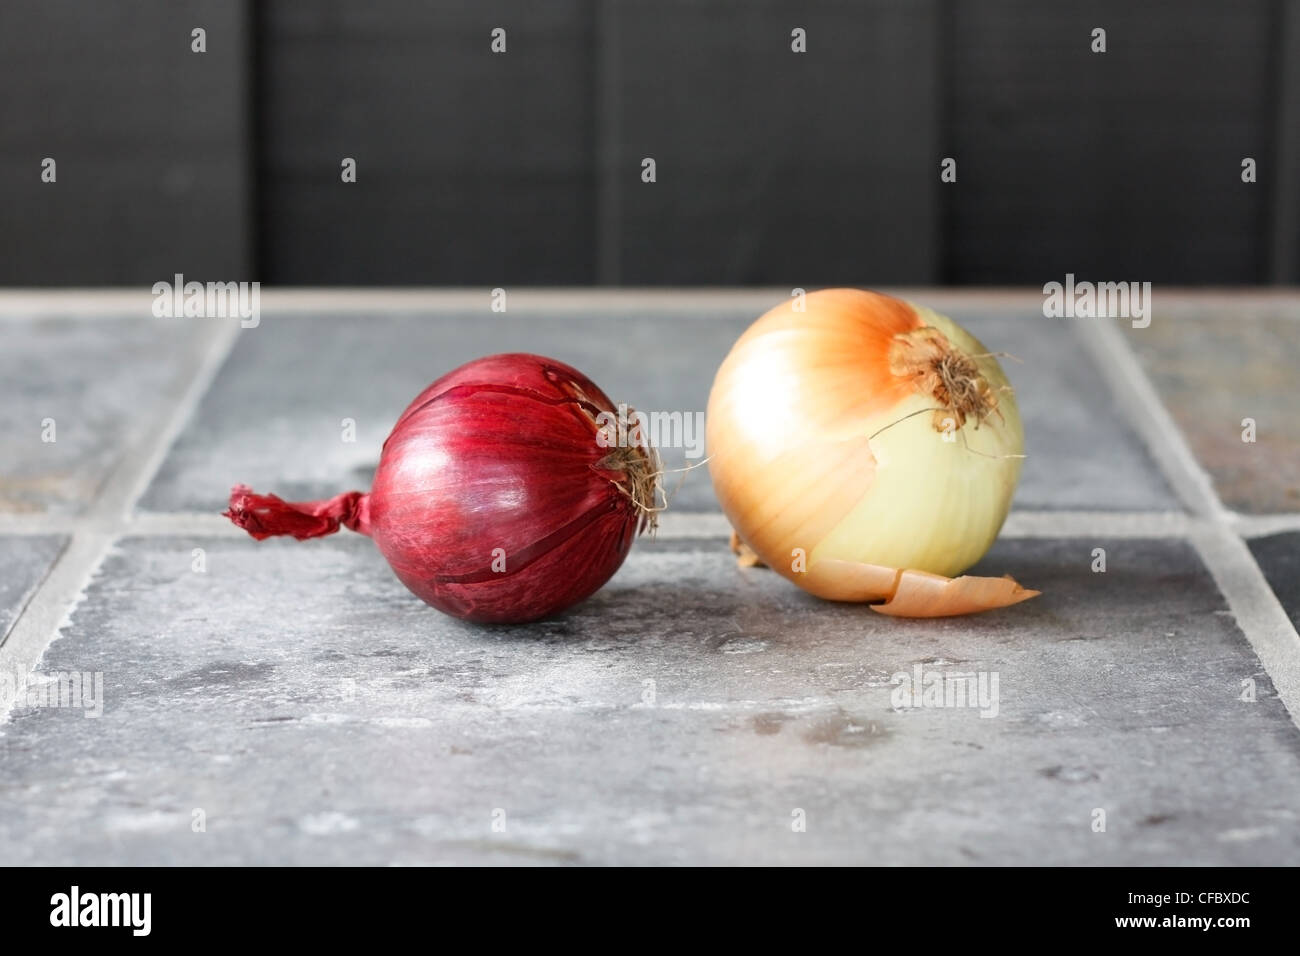 Onions in an outdoor kitchen Stock Photo